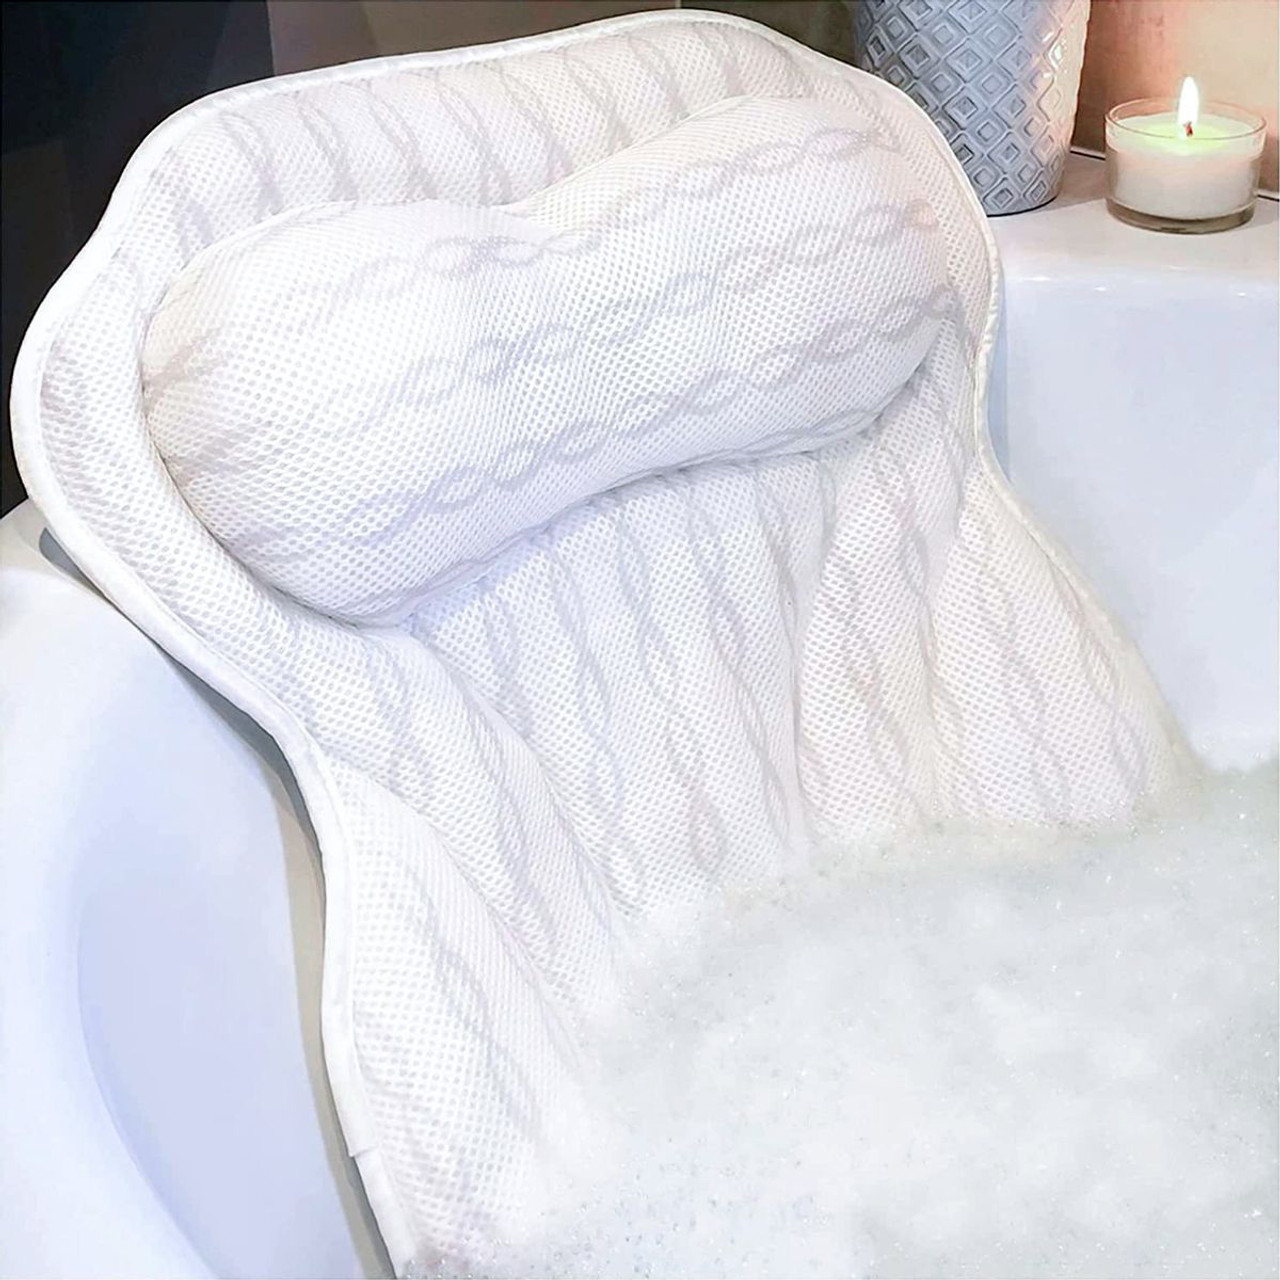 Luxury Relaxation Bath Tub Pillow product image